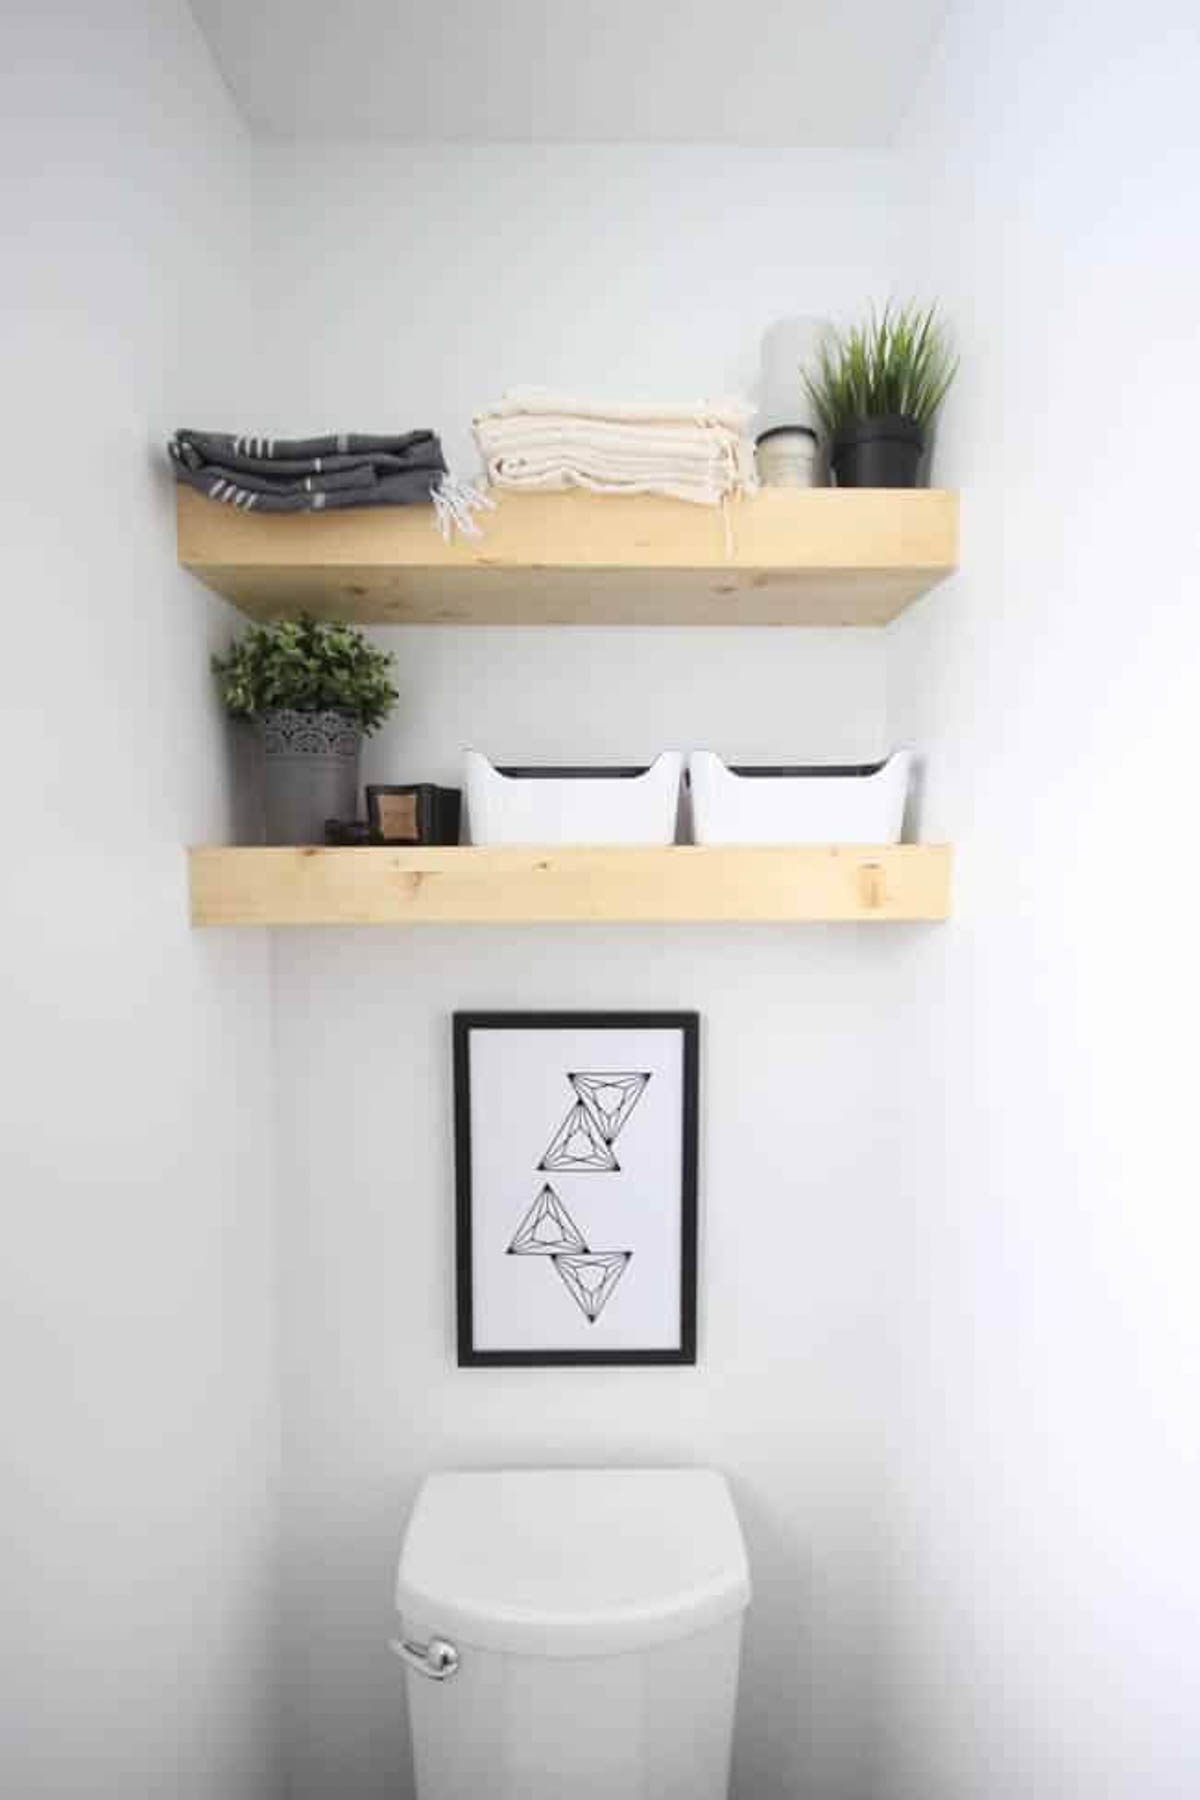 Completely decorated easy floating shelves in a bathroom